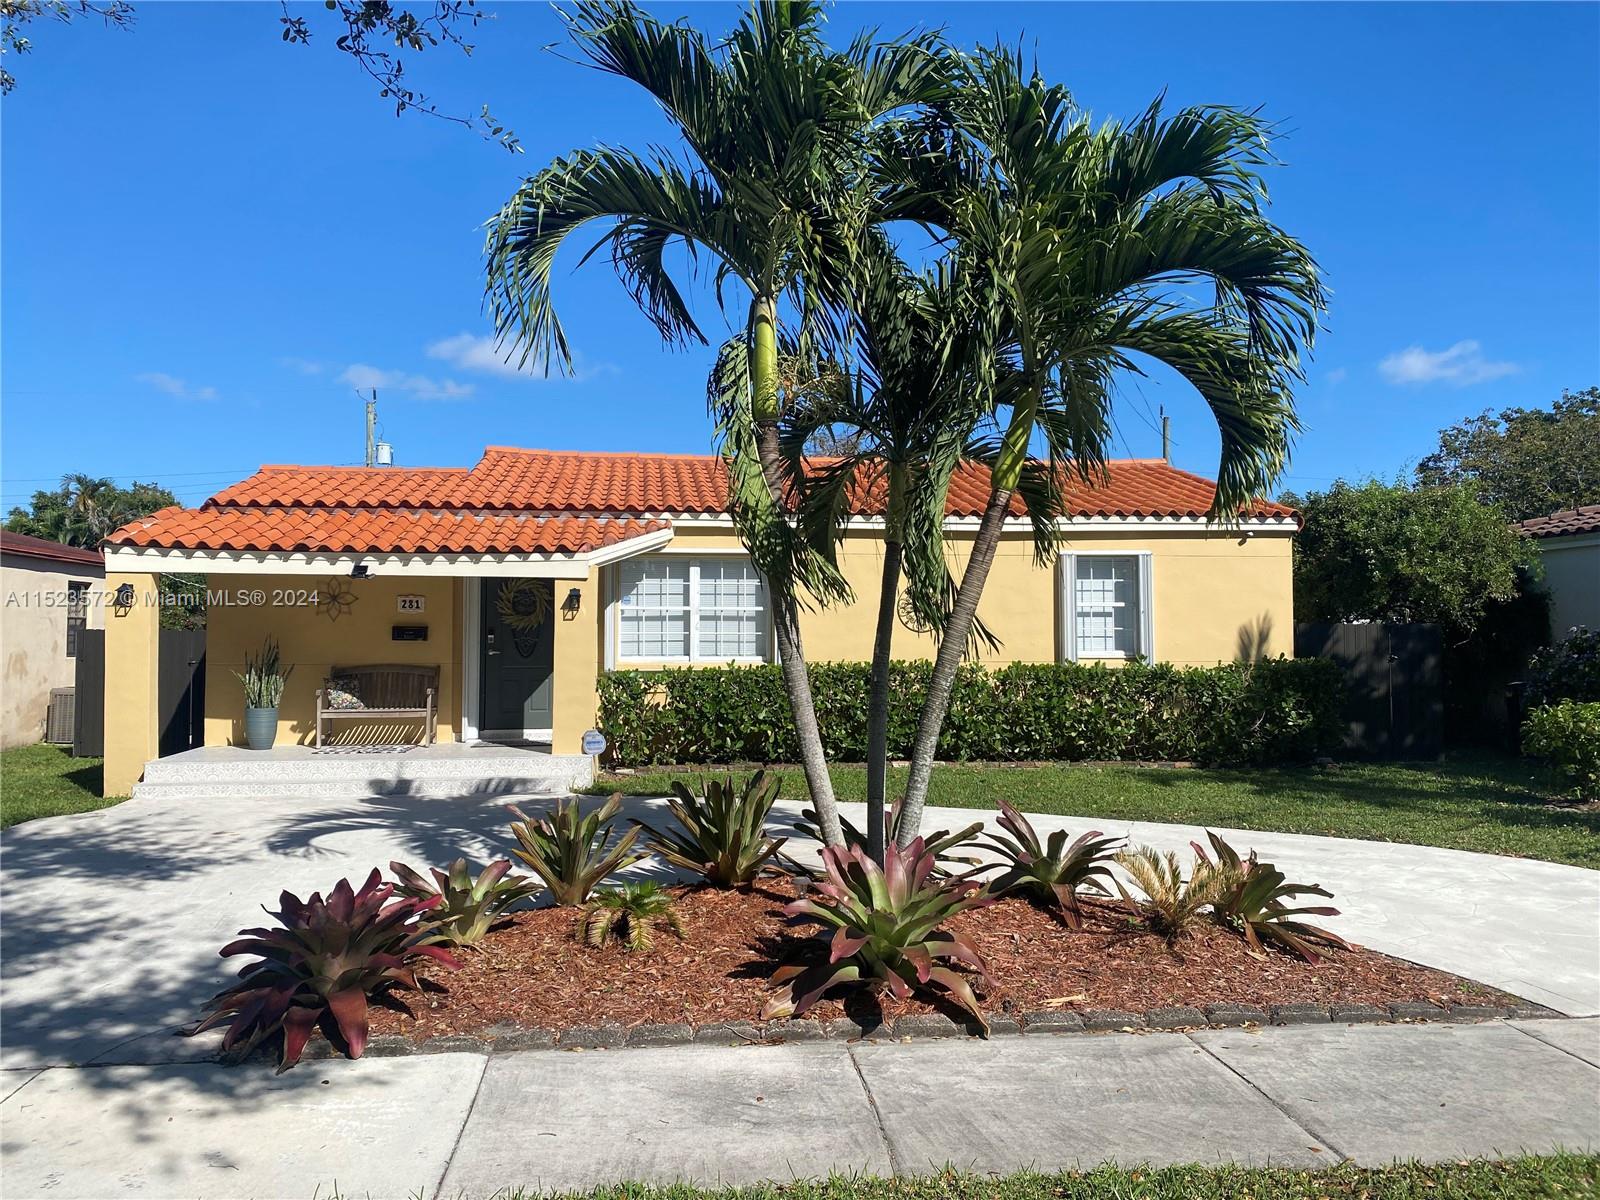 281 Lafayette Dr, Miami Springs, Florida 33166, 3 Bedrooms Bedrooms, ,2 BathroomsBathrooms,Residentiallease,For Rent,281 Lafayette Dr,A11523572